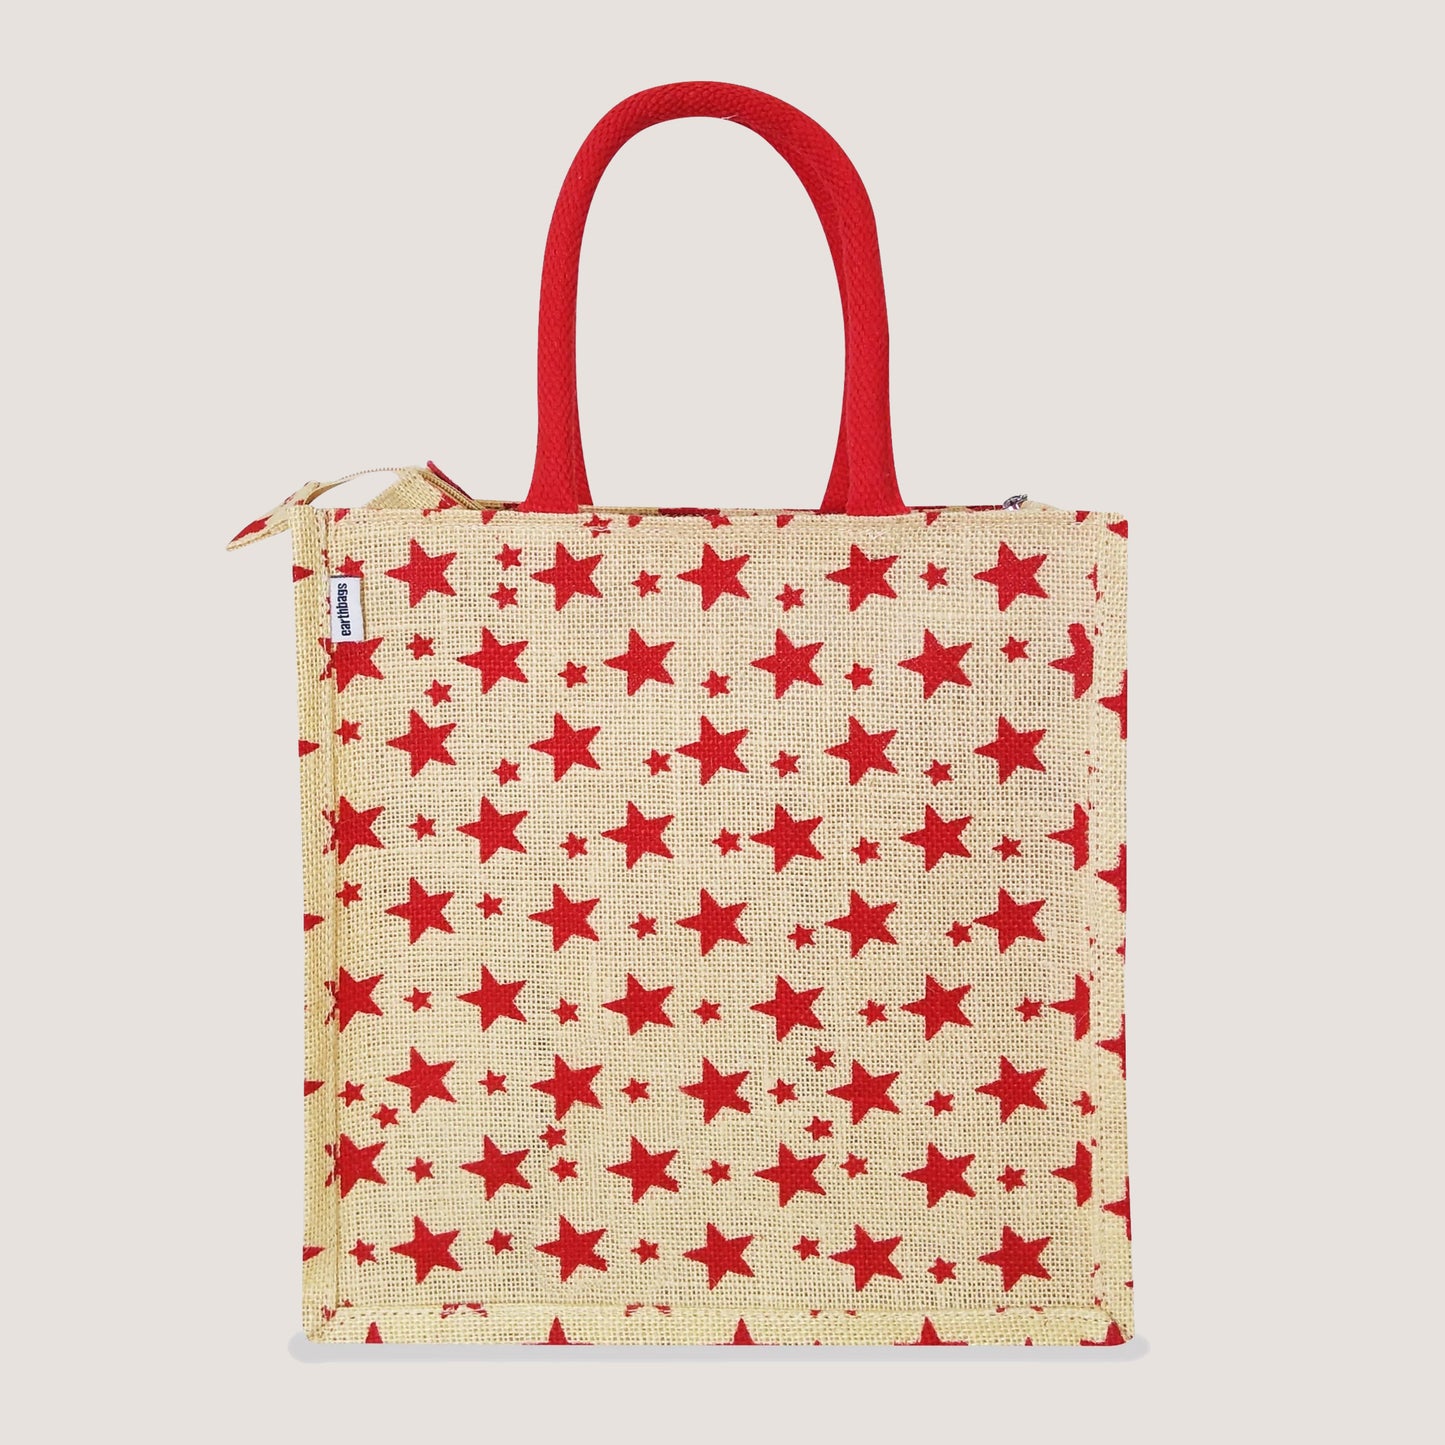 EARTHBAGS STAR PRINTED JUTE LUNCH BAG WITH ZIPPER